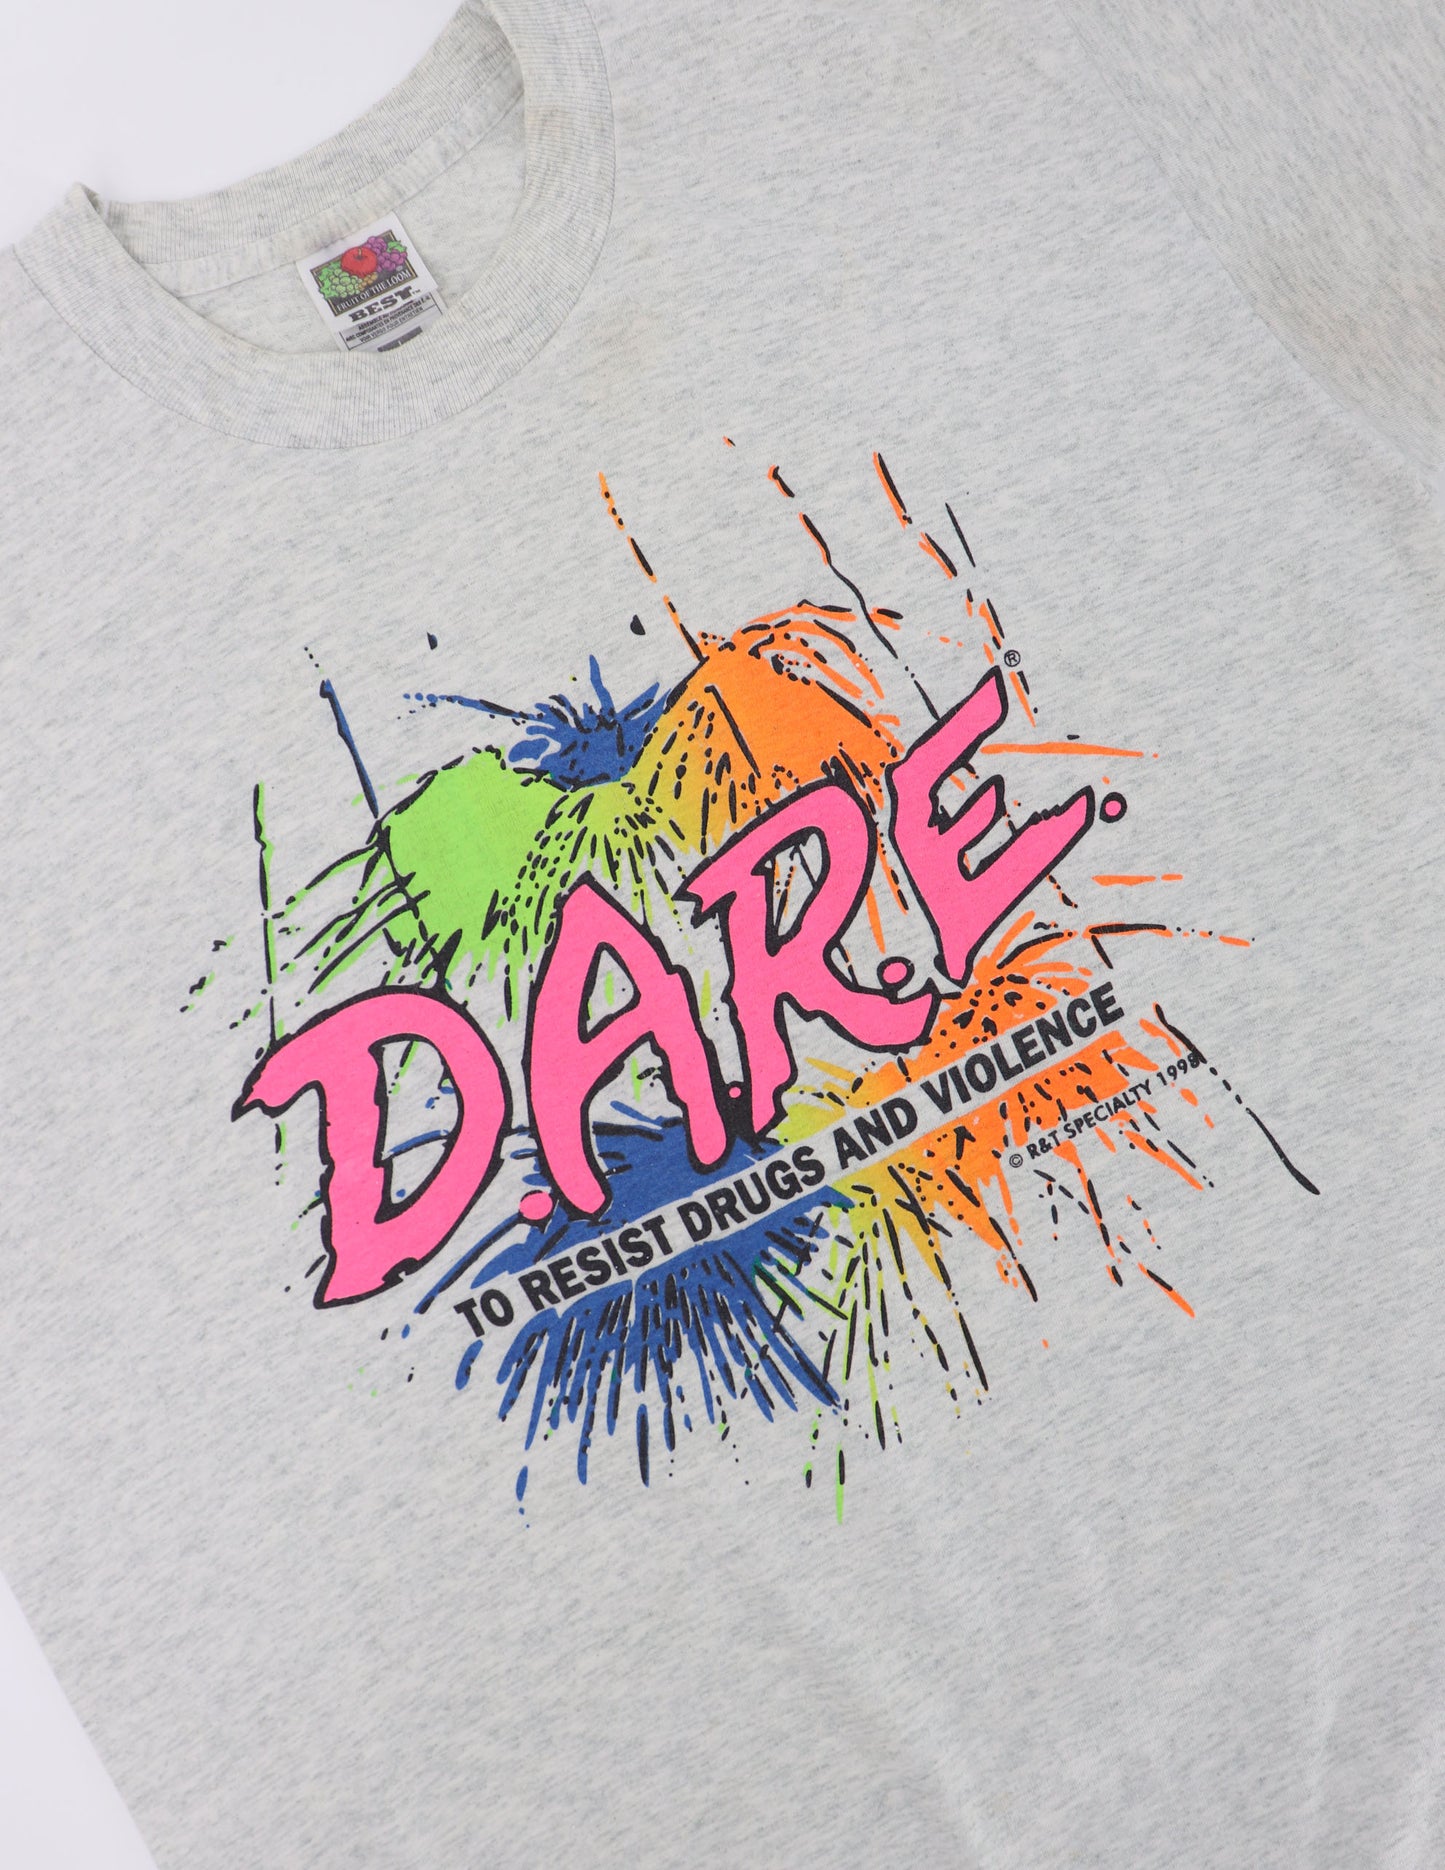 D.A.R.E TO RESIST DRUGS AND VIOLENCE 1998